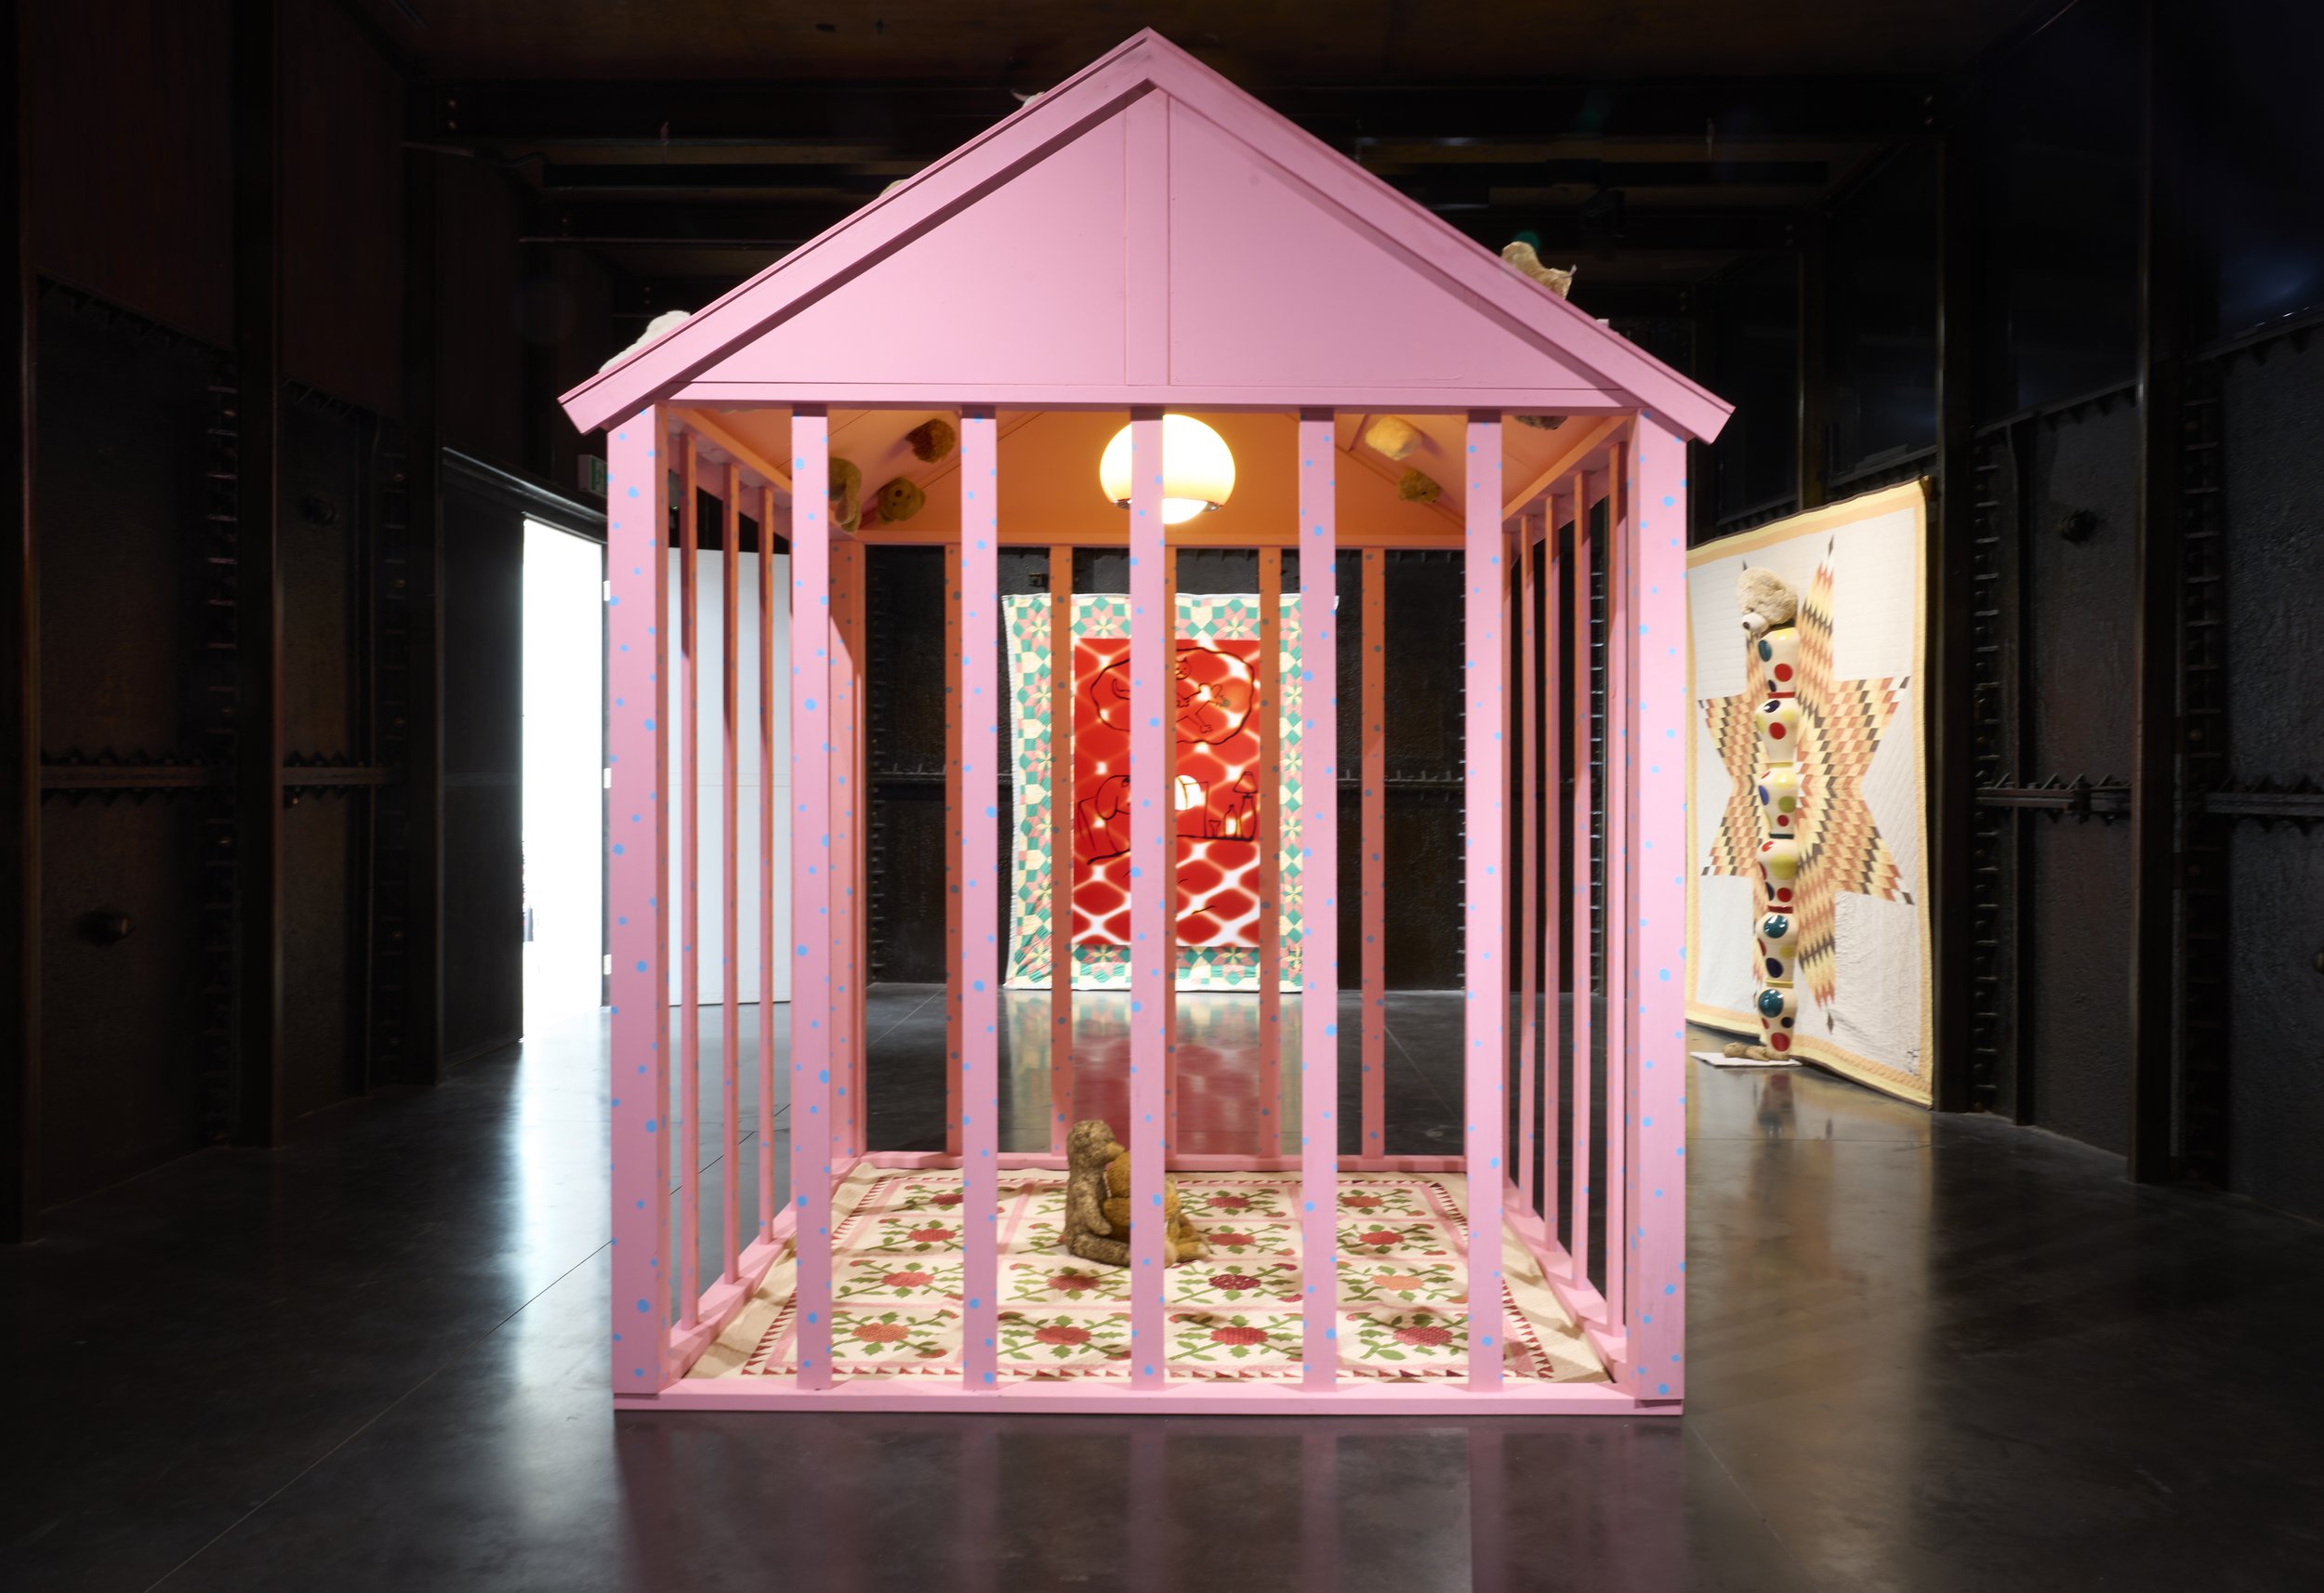 Memory House, 2022, Wood, quilt and stuffed animals, 290 x 230 x 220 cm, 114 x 90 x 86”